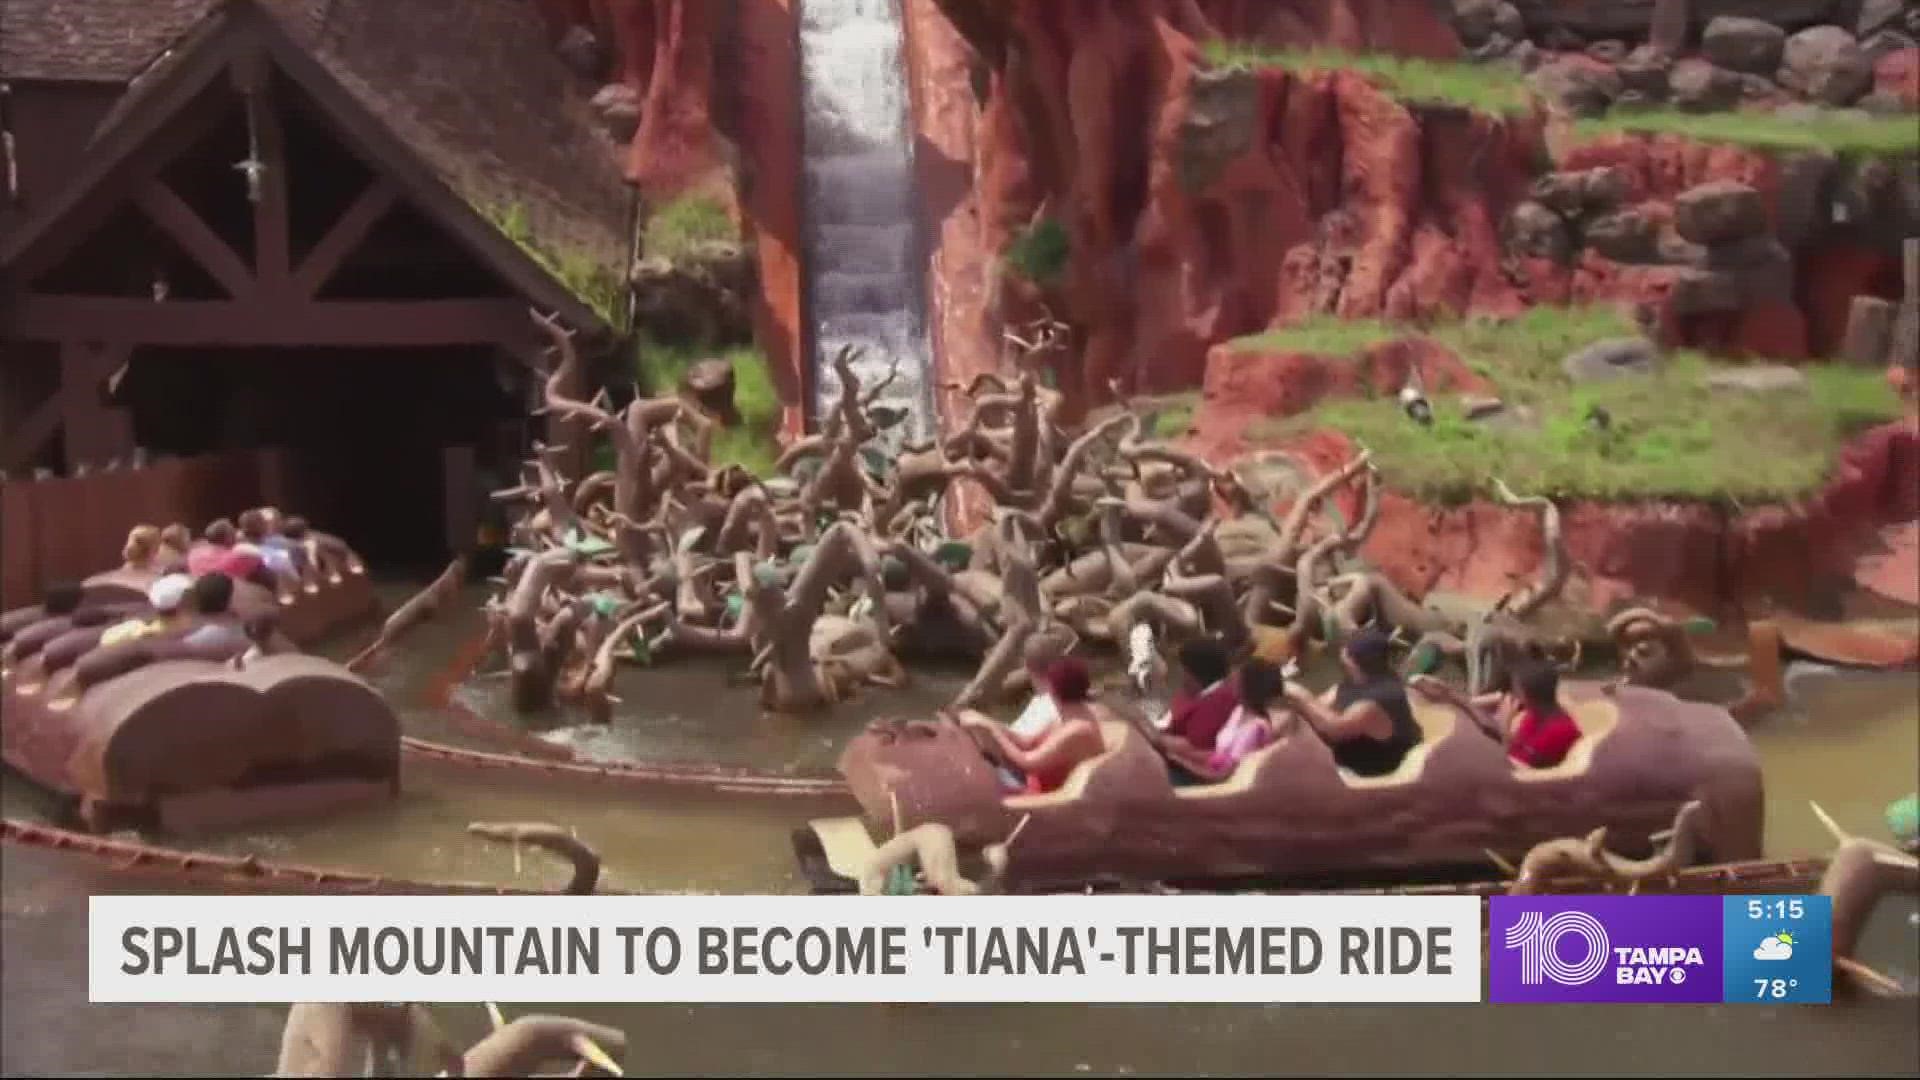 The ride will close on Jan. 23, 2023, for a "The Princess at the Frog"-inspired revamp.